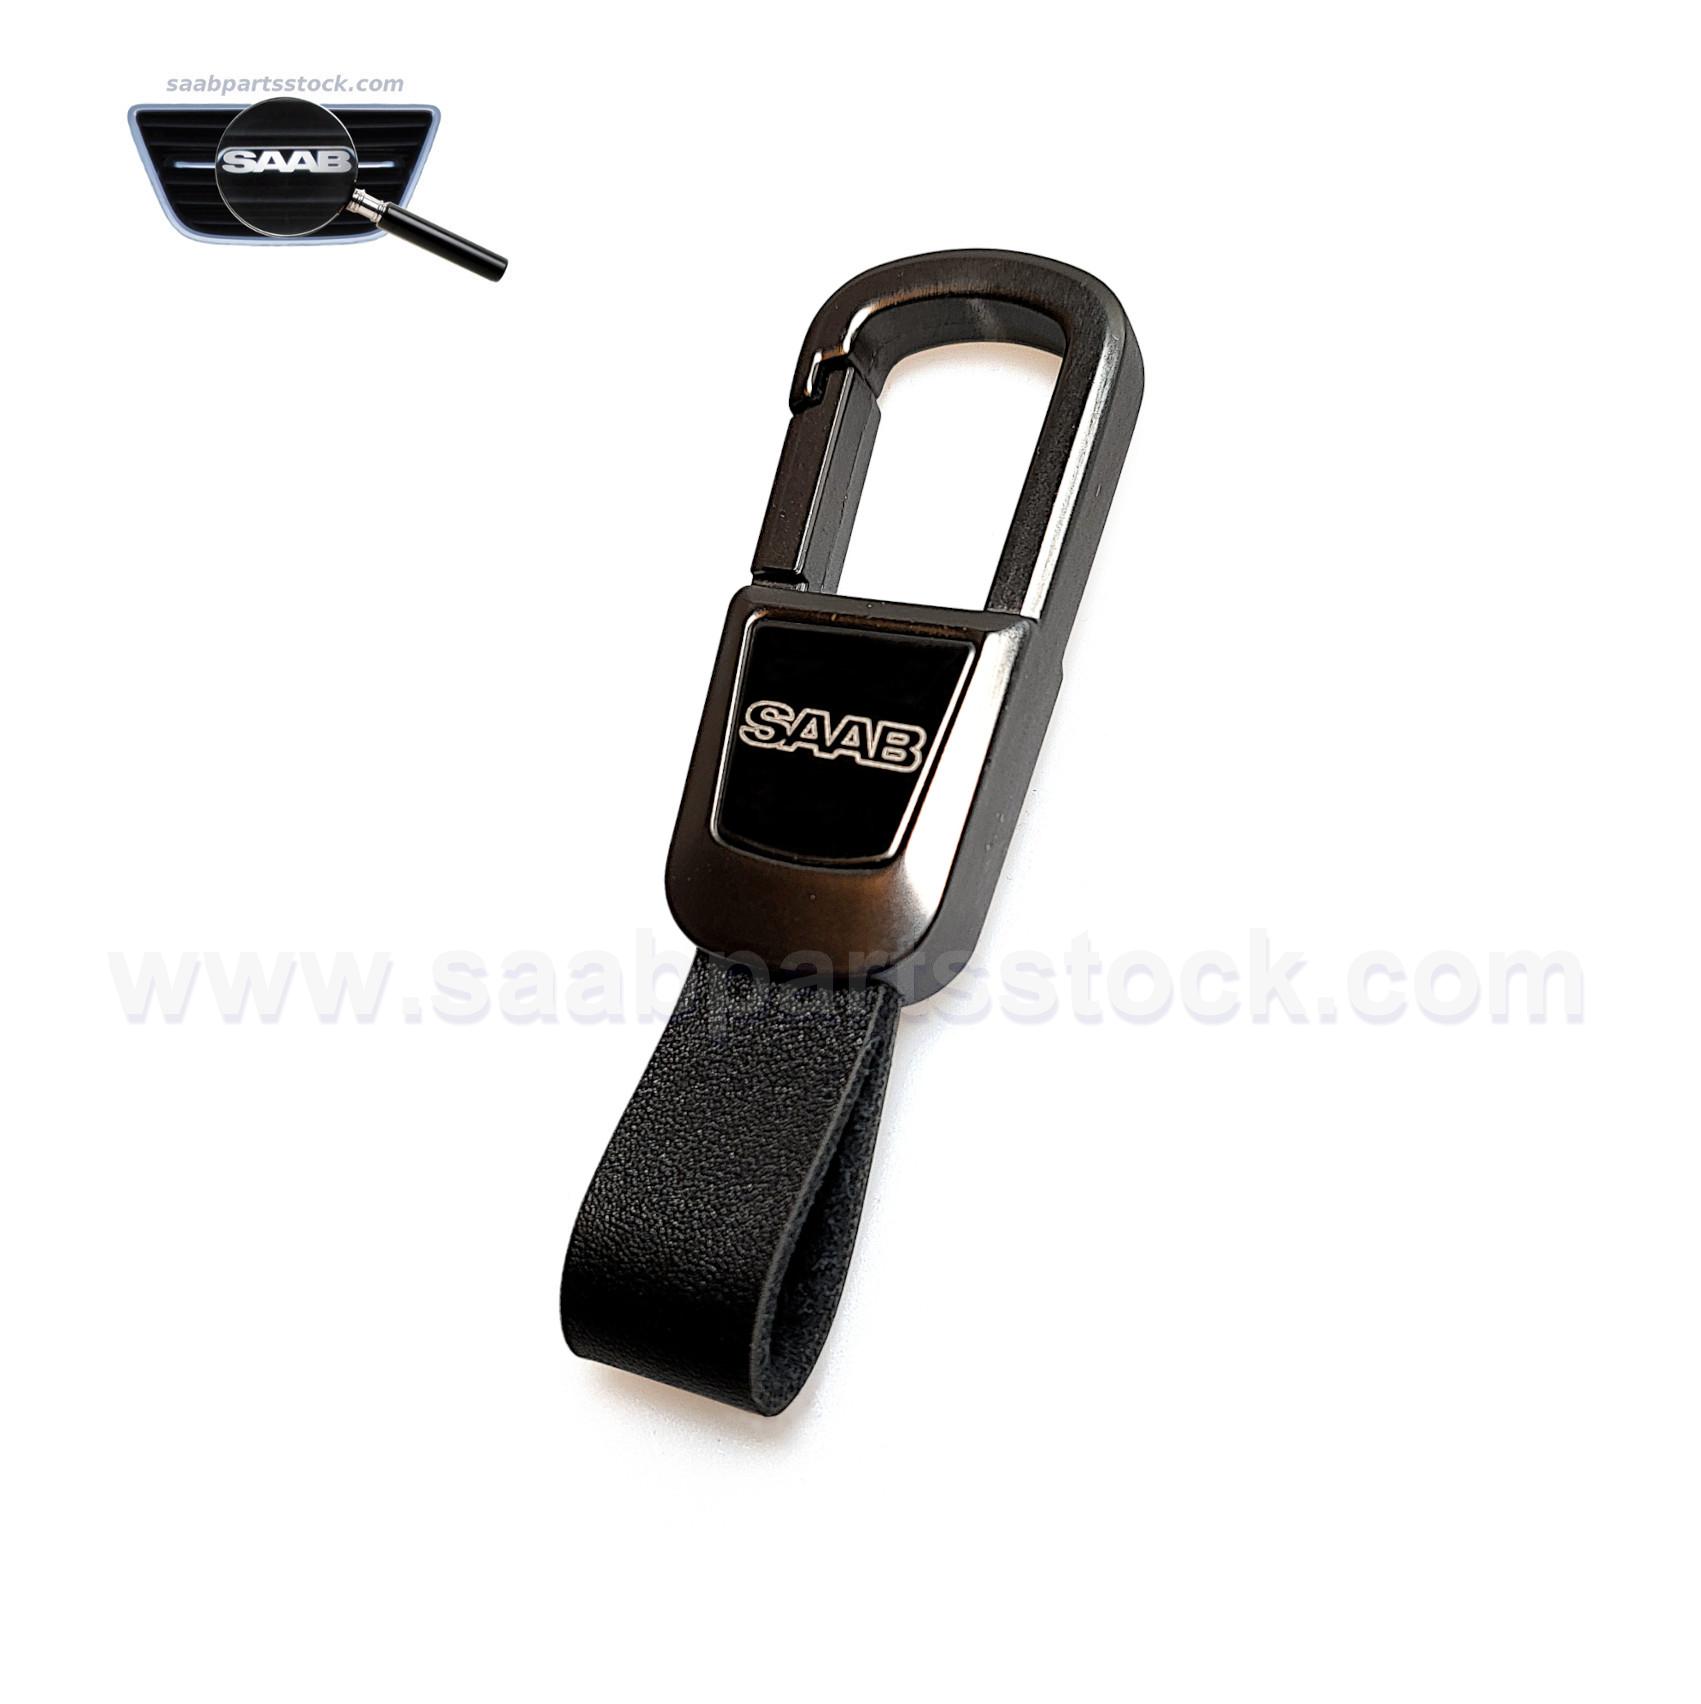 Key Ring with SAAB Letter Logotype